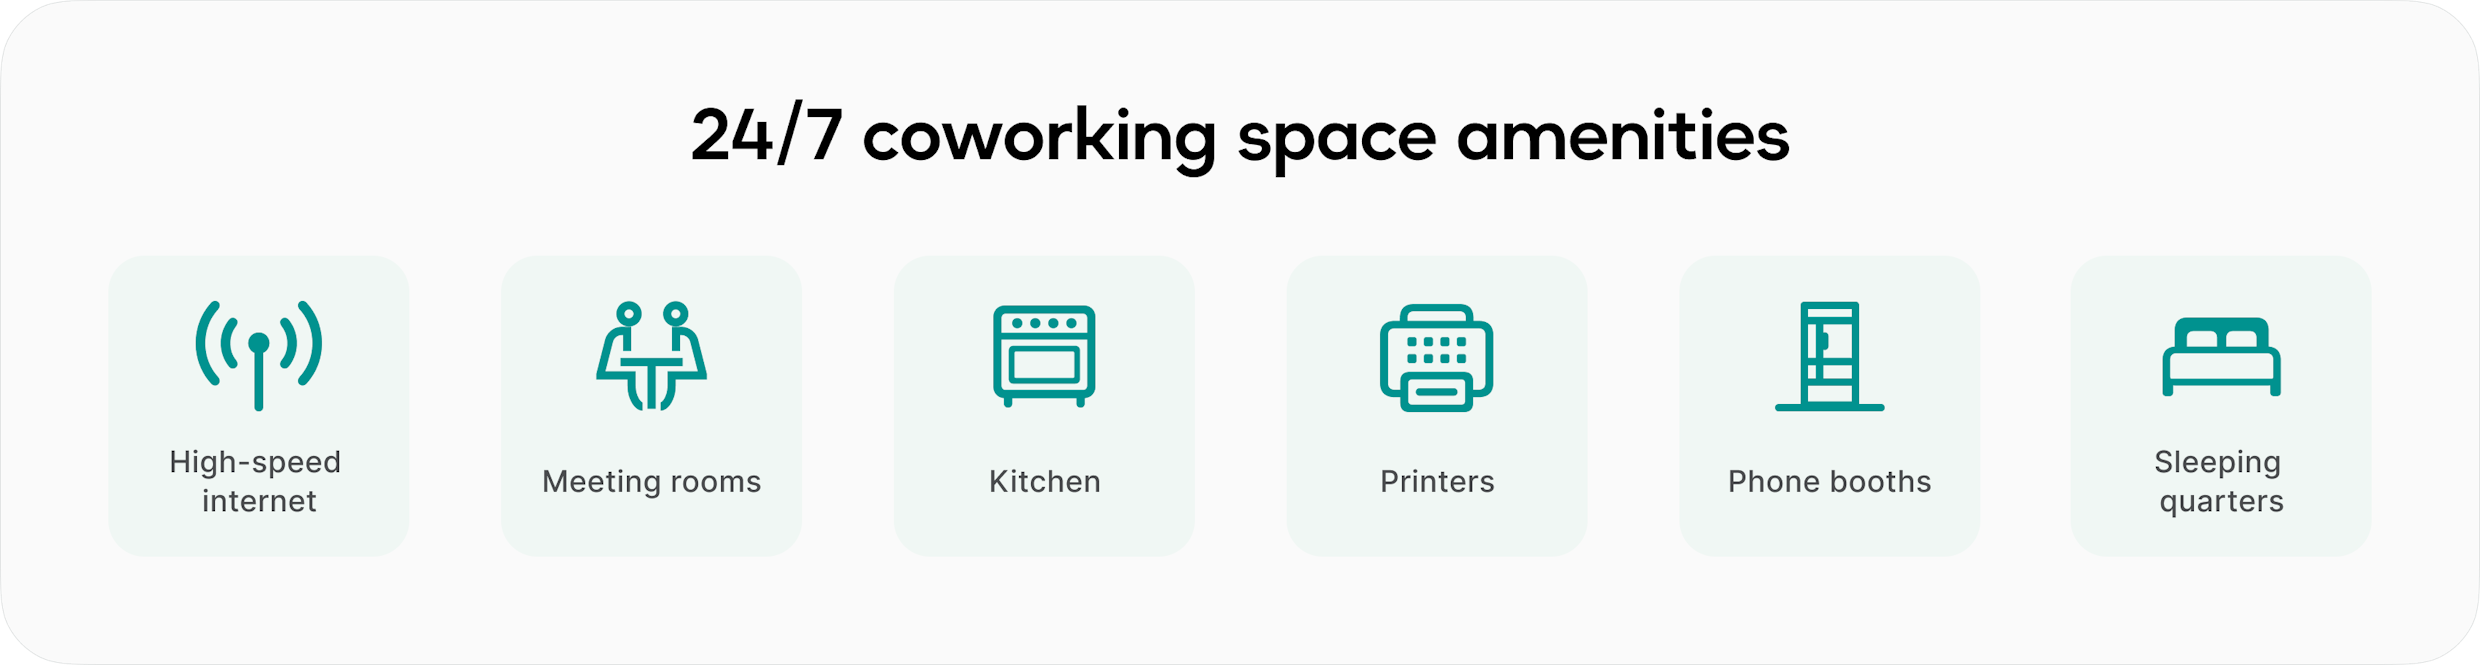 Amenities at 24/7 coworking space